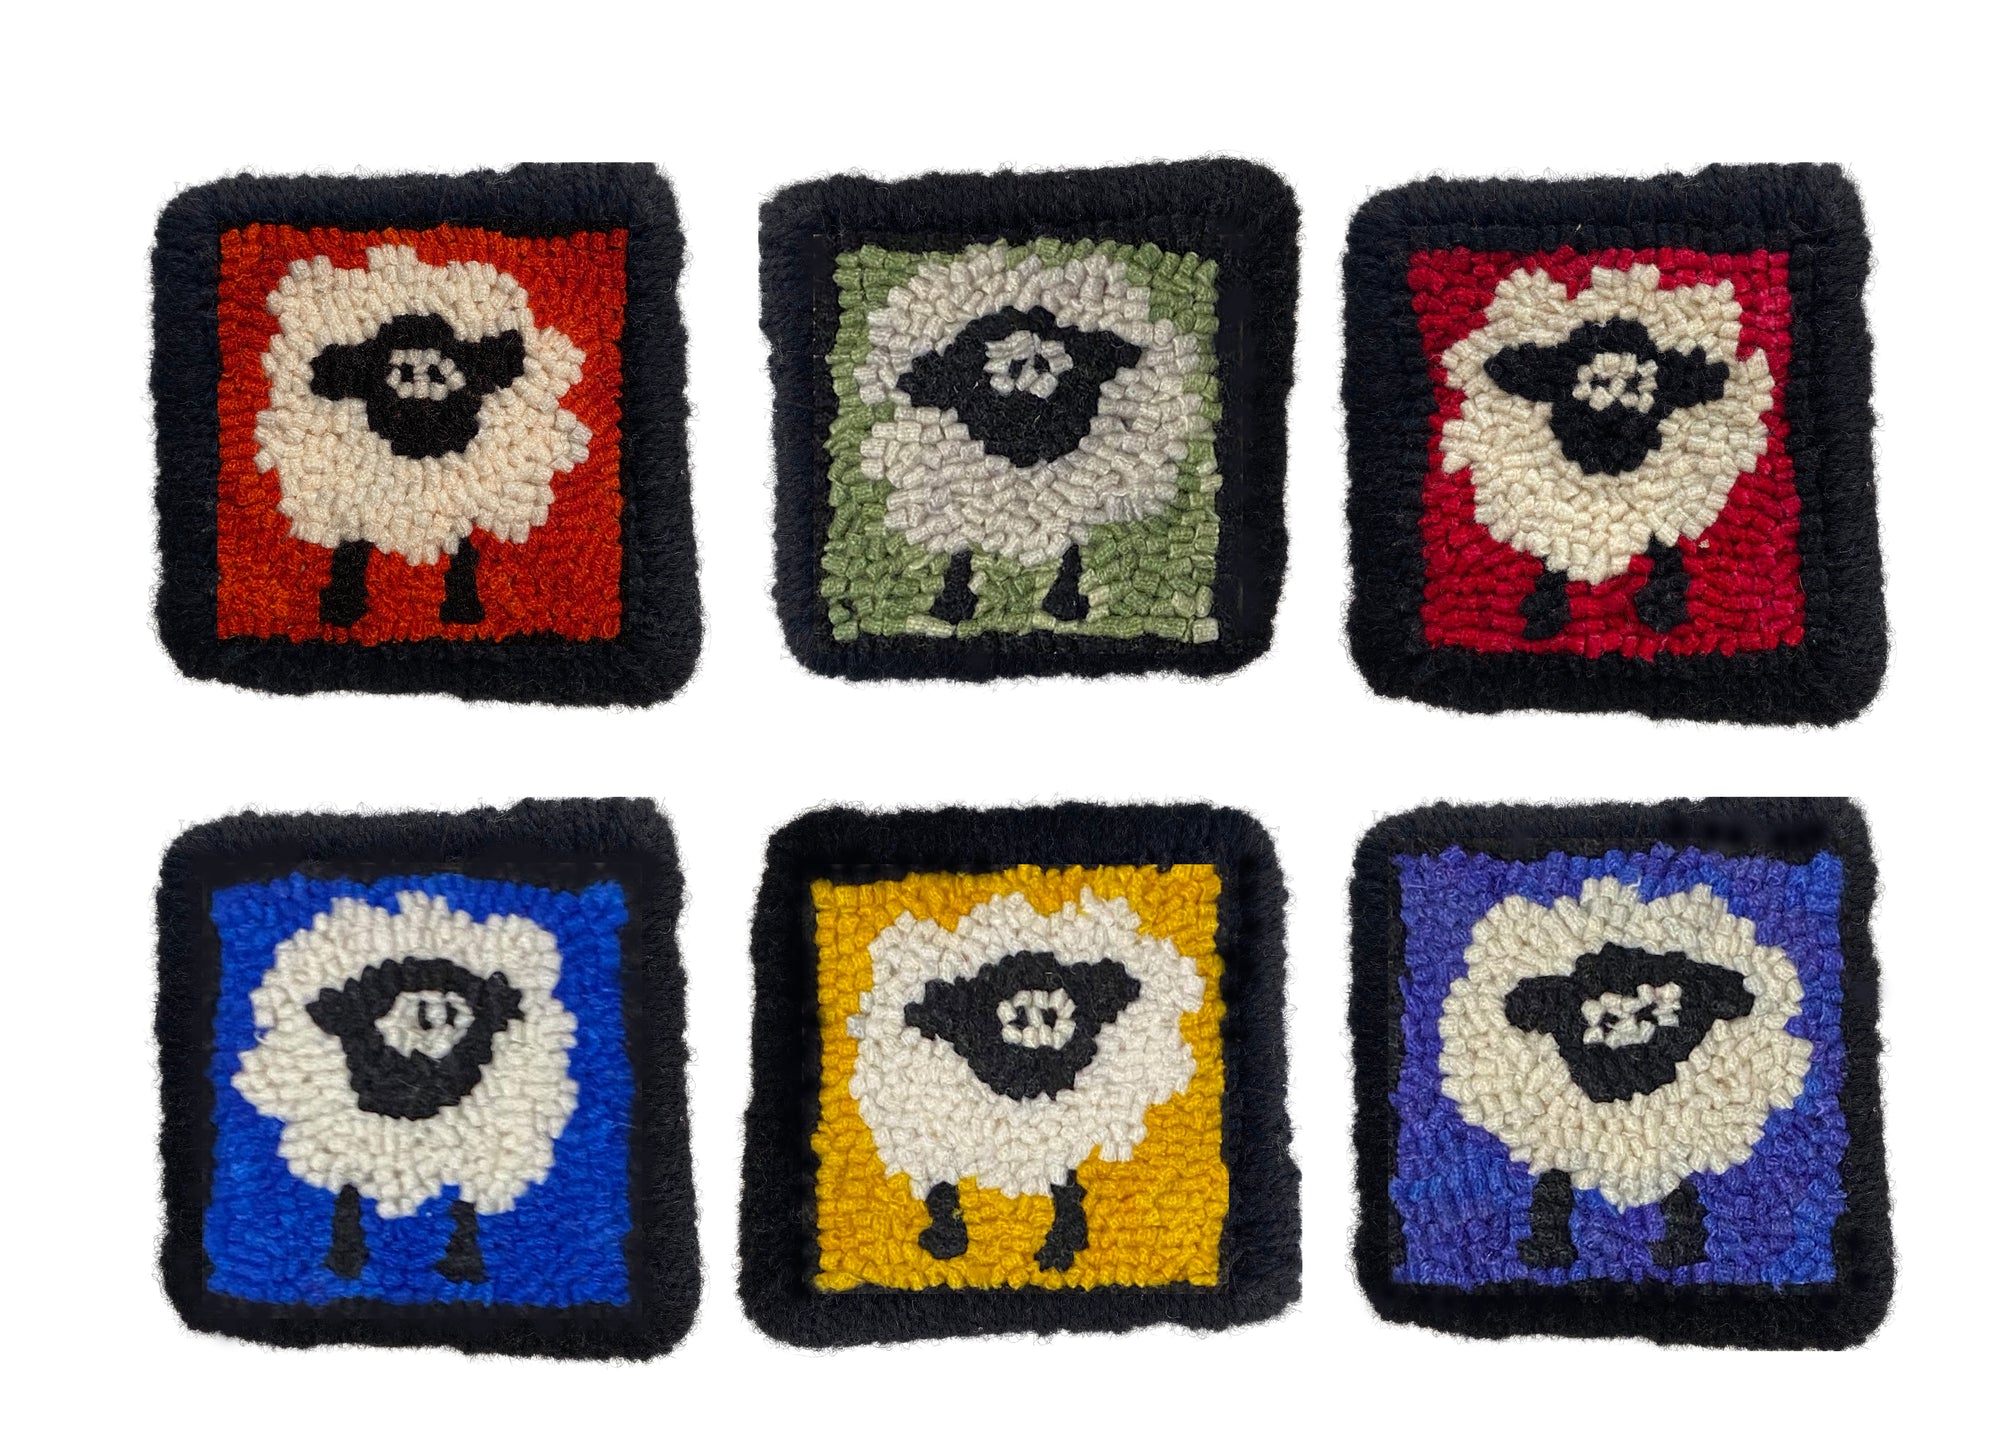 Beginner Rug Hooking Class - Thursday May 9, 6pm-8pm